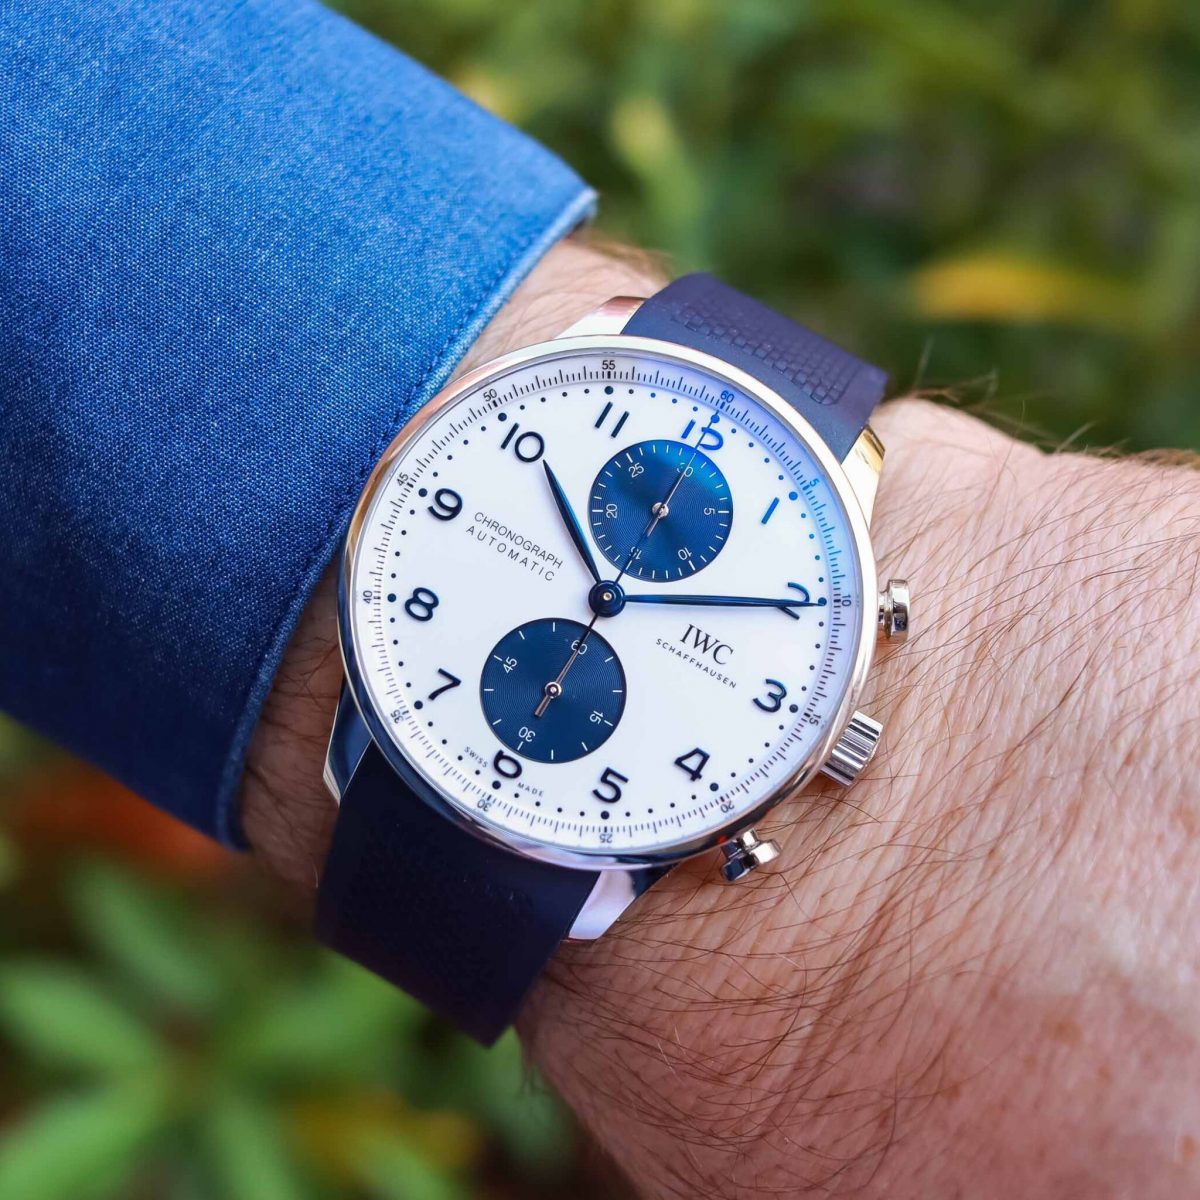 The UK Top Quality Fake IWC Portugieser Chronograph Blue Panda Might Be The Collection’s Highlight